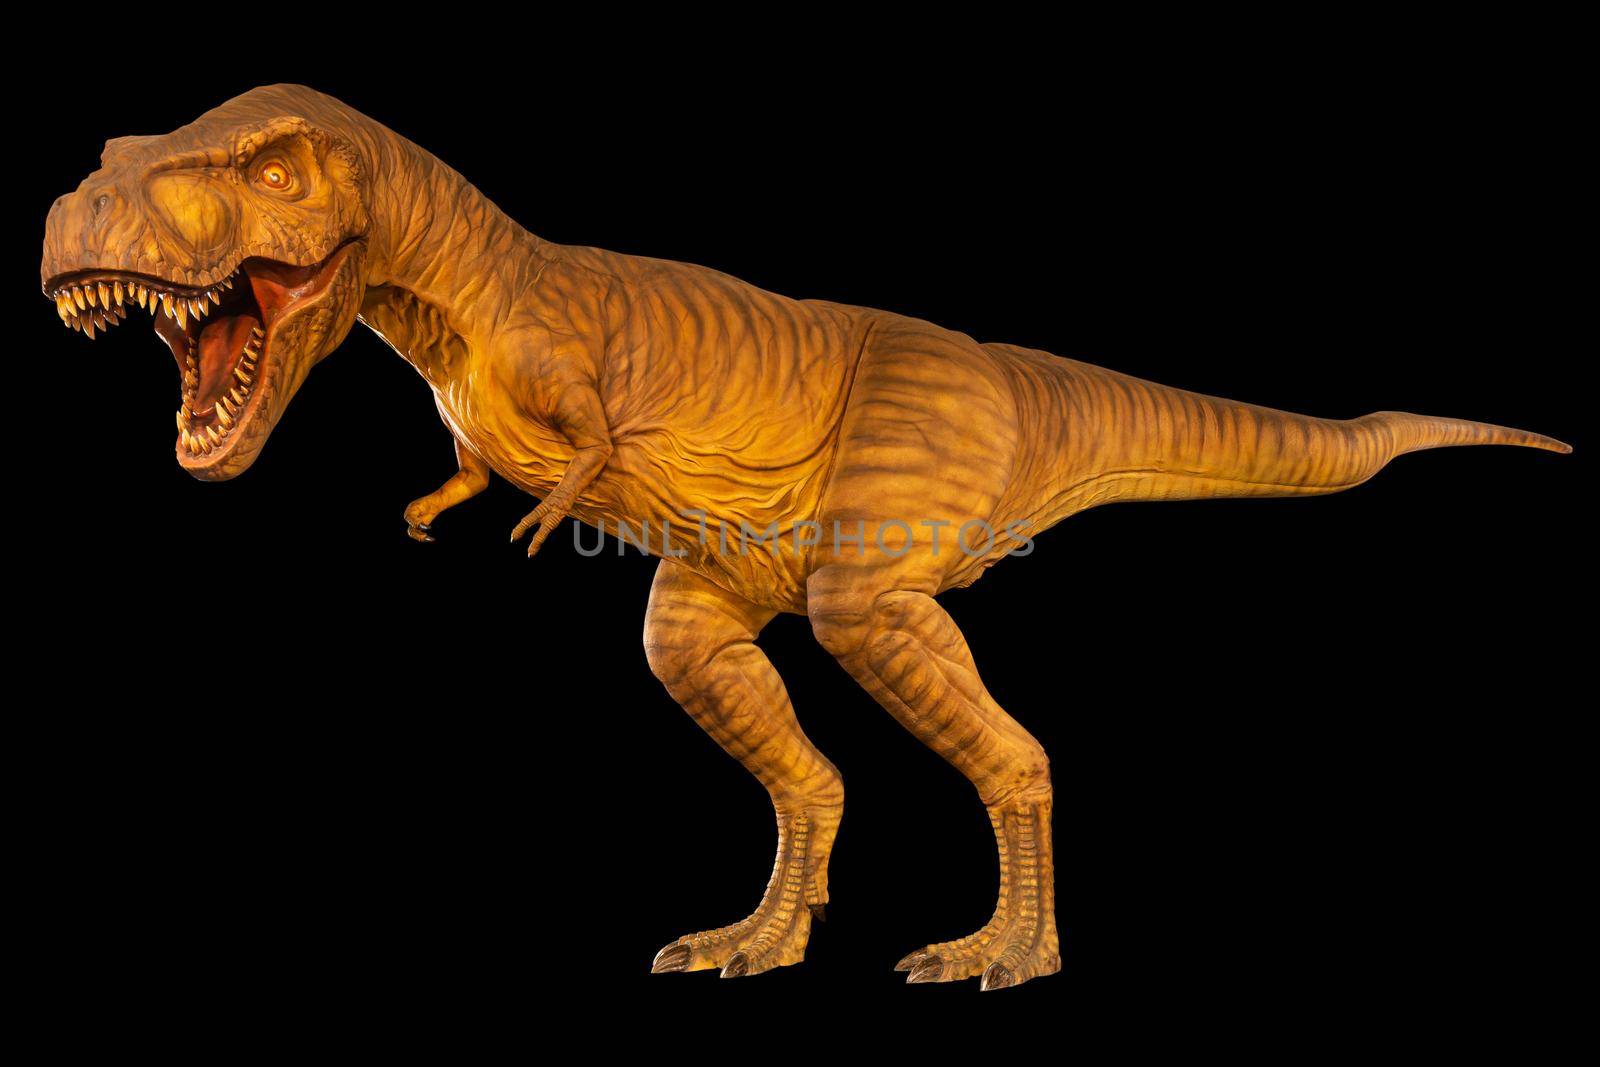 Tyrannosaurus rex ( T-rex ) is walking and open mouth . Side view . Black isolated background . Dinosaur in jurassic peroid . Embedded clipping paths . by stockdevil